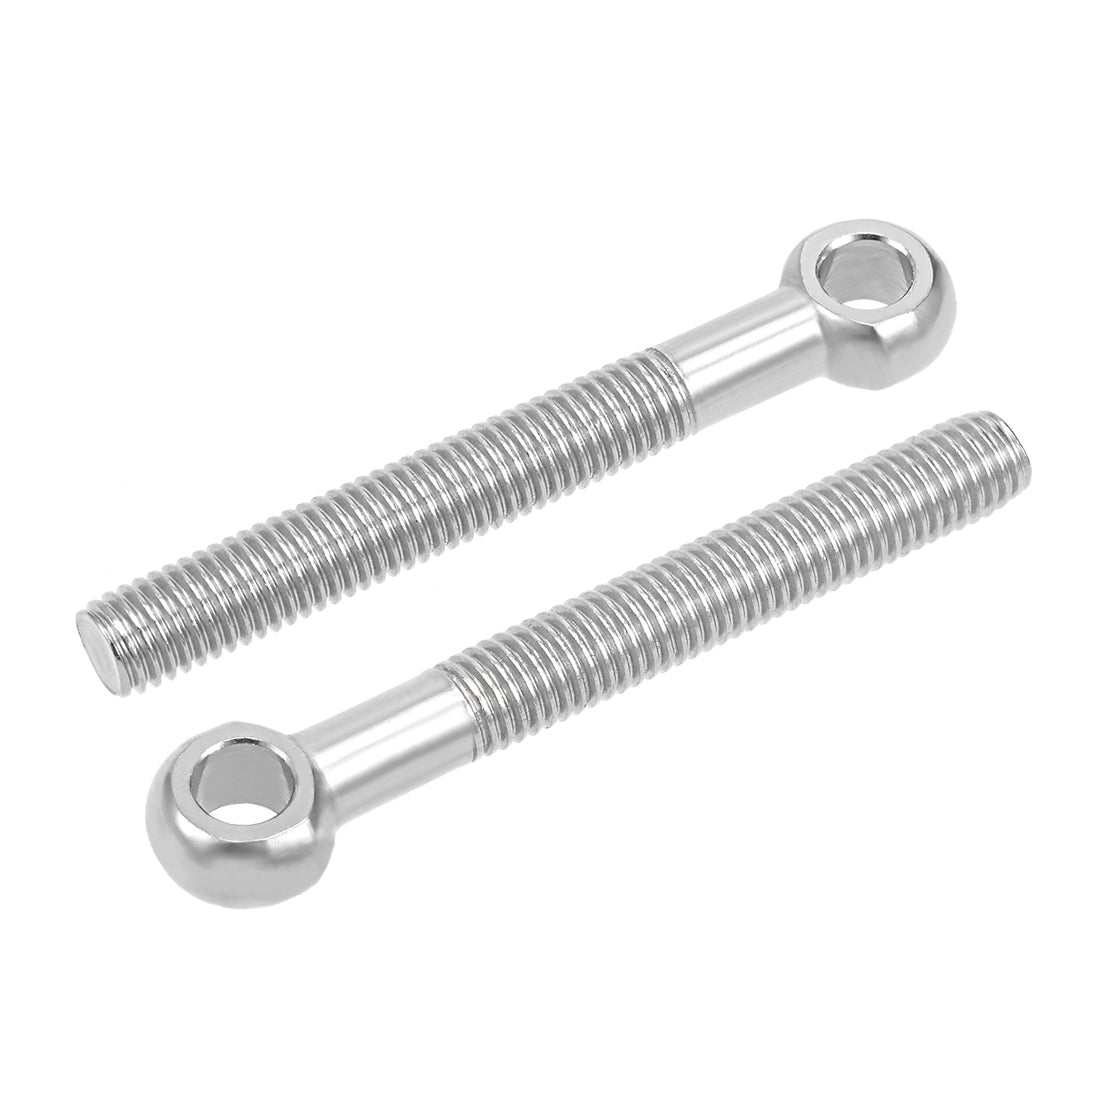 uxcell Uxcell M10 x 80mm 304 Stainless Steel Machine Shoulder Lift Eye Bolt Rigging 10pcs